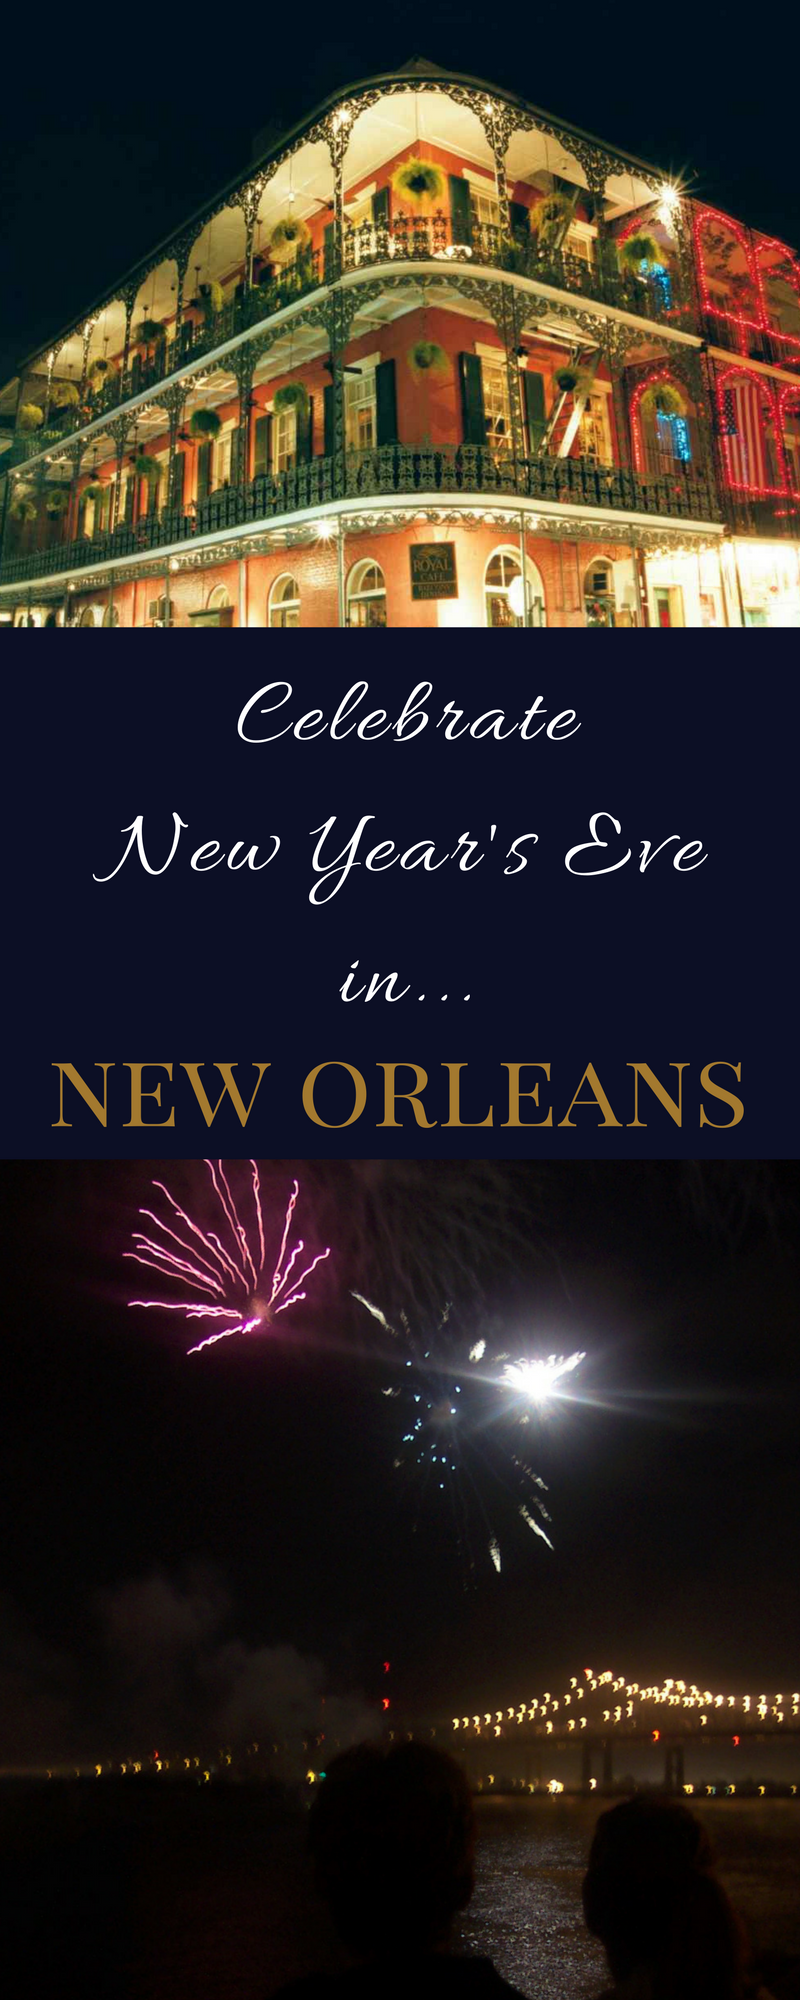 Ring in the New Year at one of the most historic spots in the French Quarter. There’s still time to to book a room at Hotel Monteleone and take advantage of the fabulous New Year’s Eve Package. Plan your visit to New Orleans today! (Photo credits: Falkue and Alli)